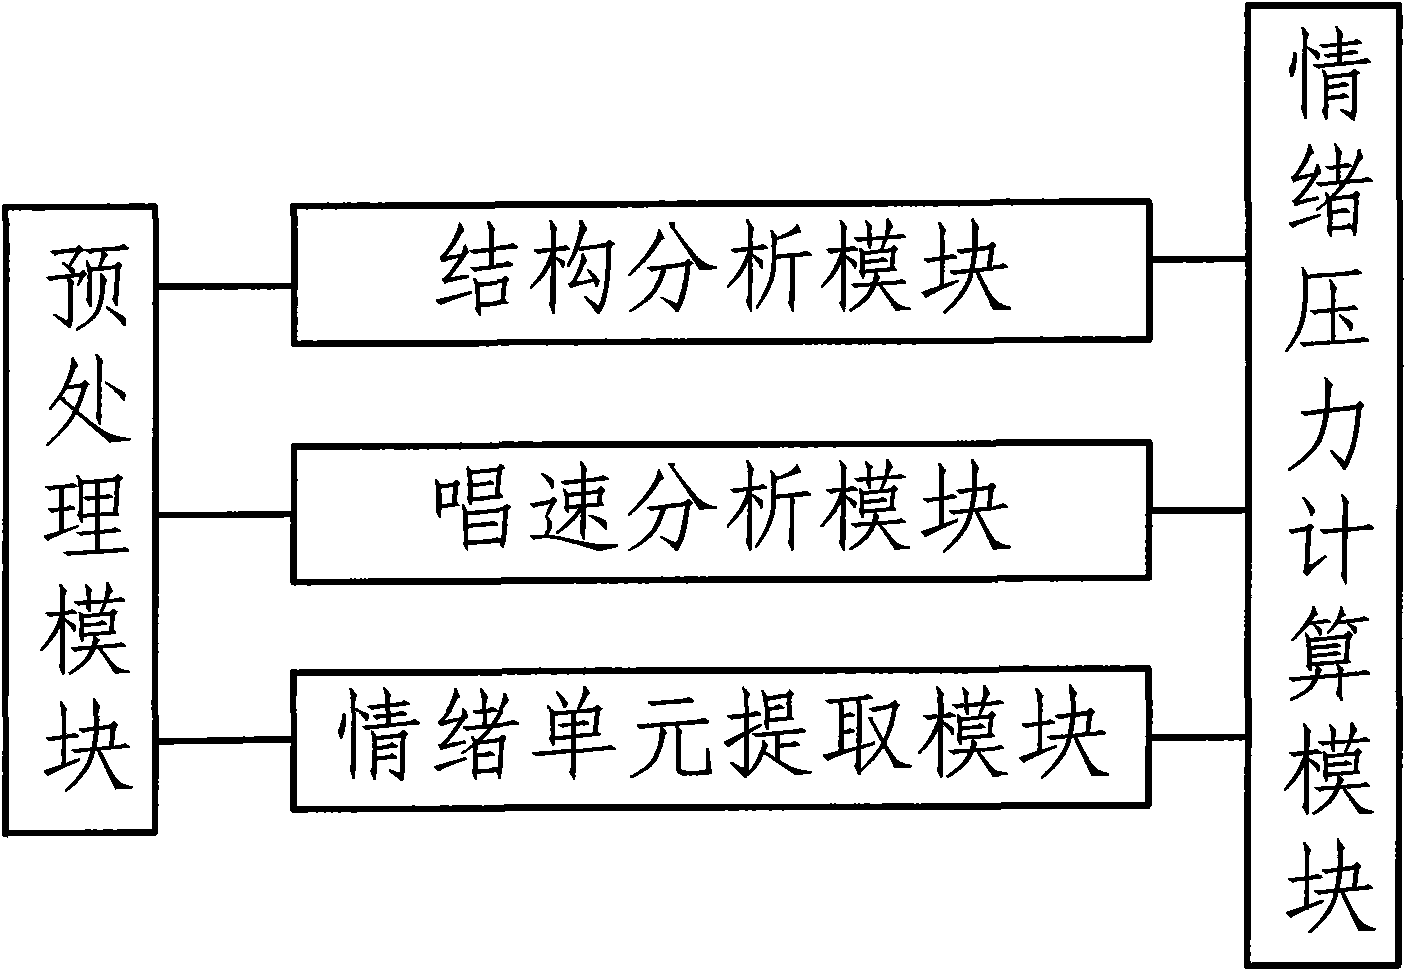 Song emotion pressure analysis method and system